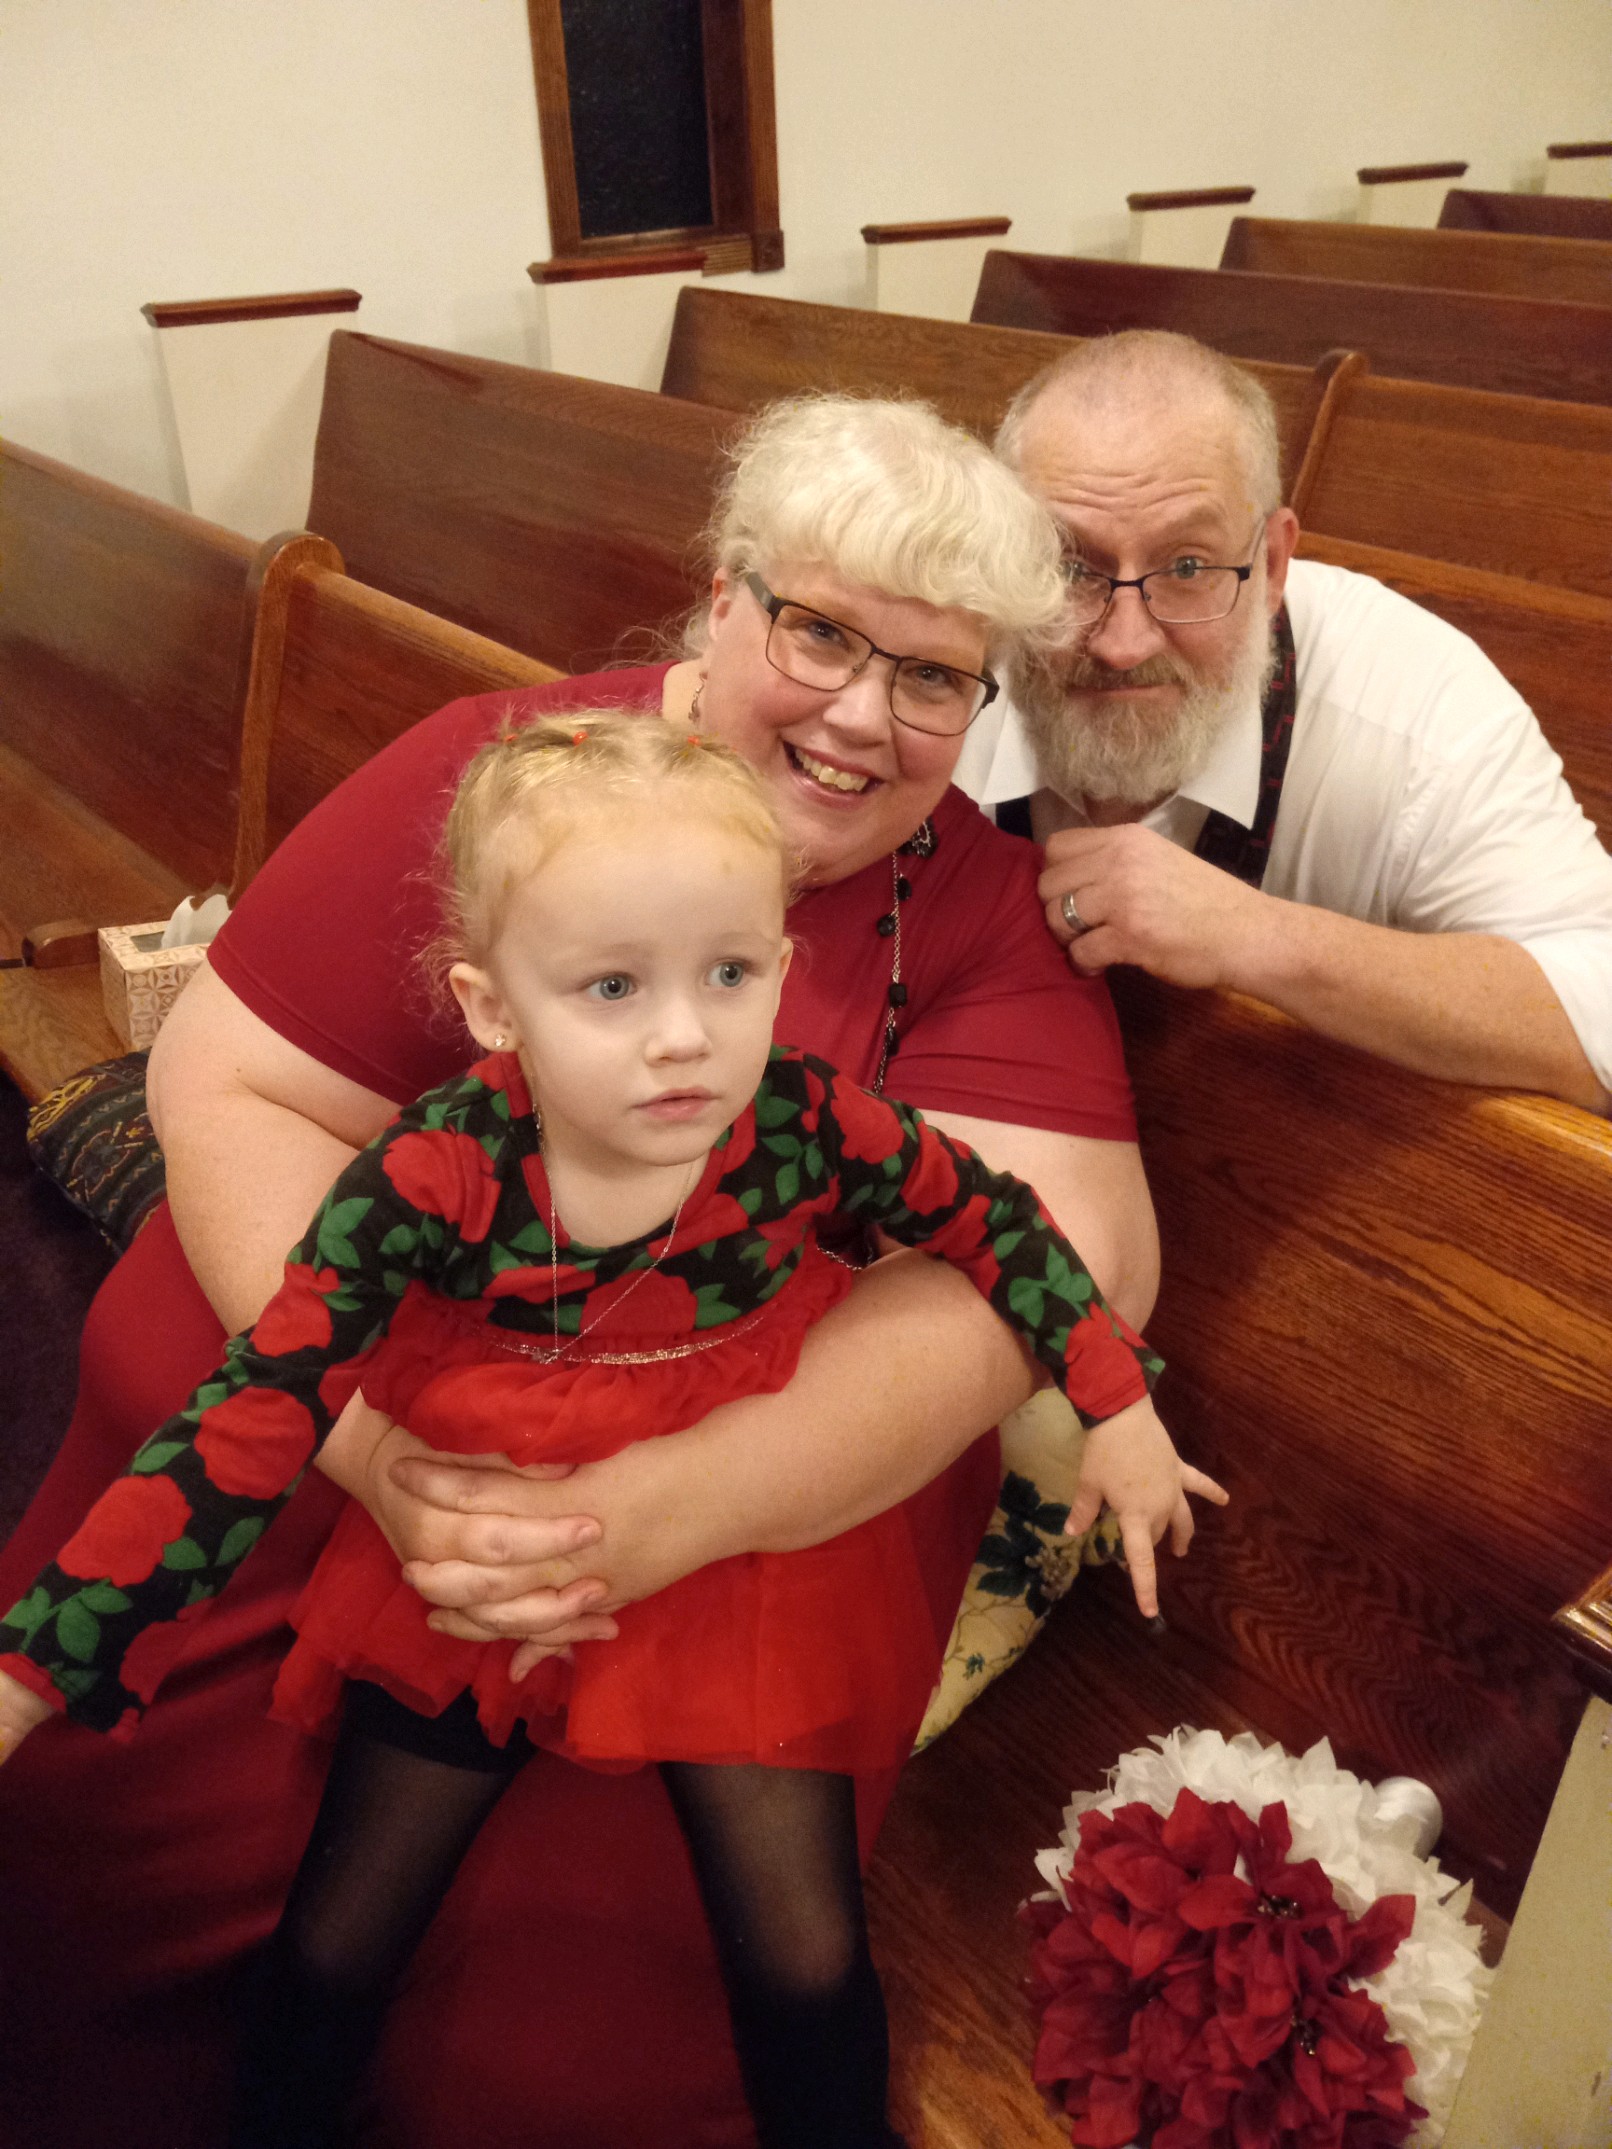 Happily married Christians in church hold a granddaughter while laughing